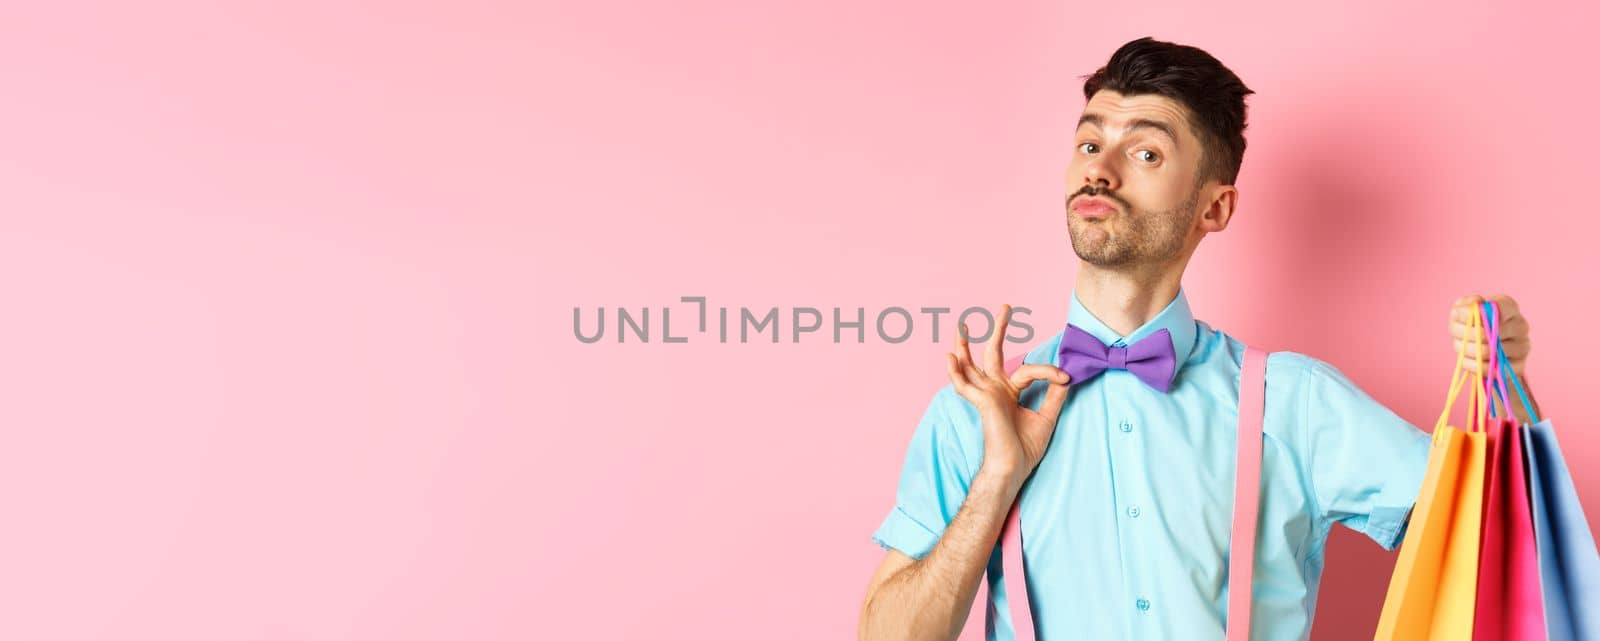 Fancy guy with moustache fixing his bow-tie and holding shopping bags, boyfriend bring gift packages, standing over pink background.